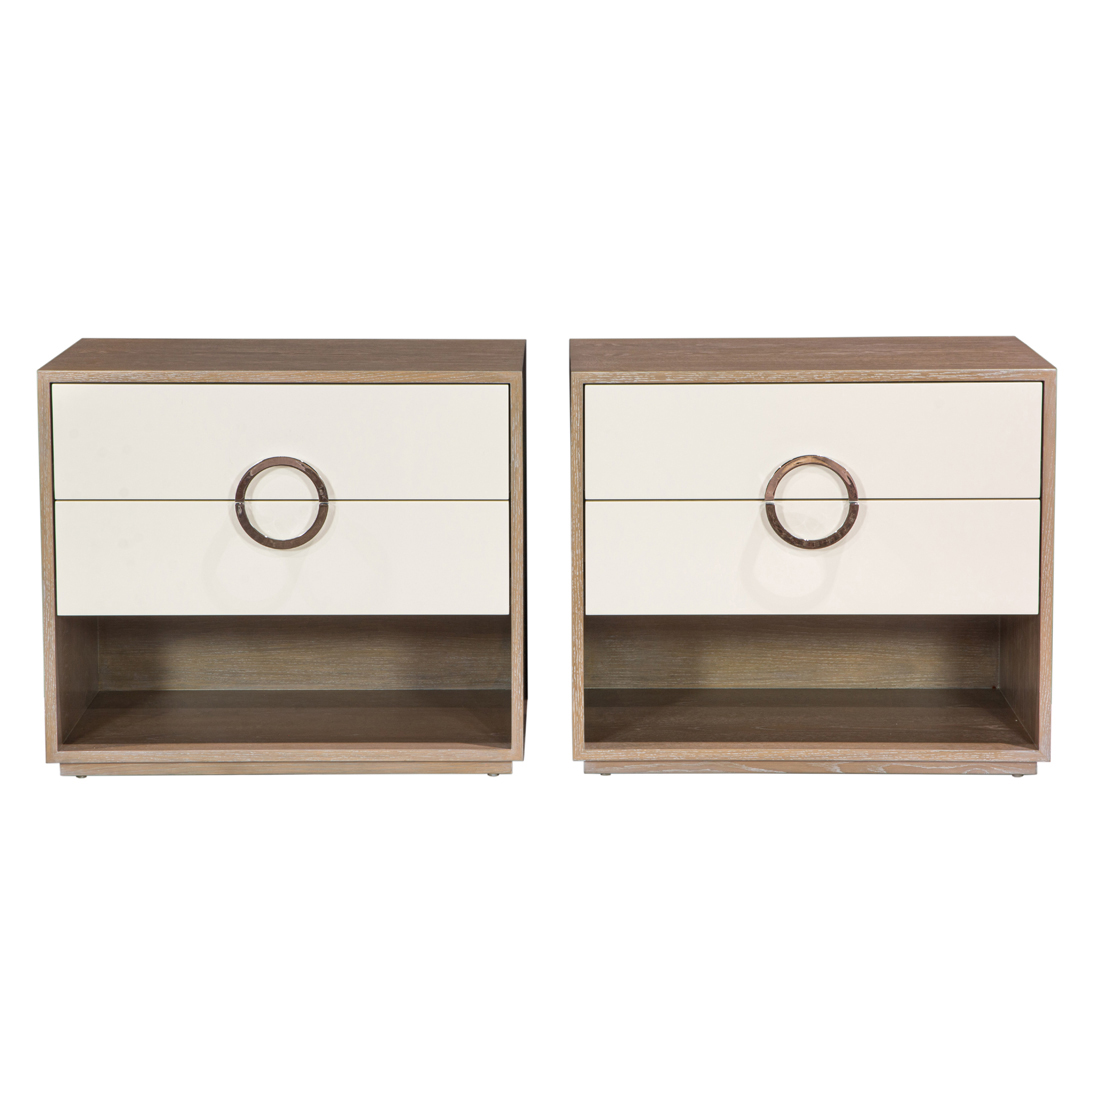 A PAIR OF CONTEMPORARY CREAM LACQUERED